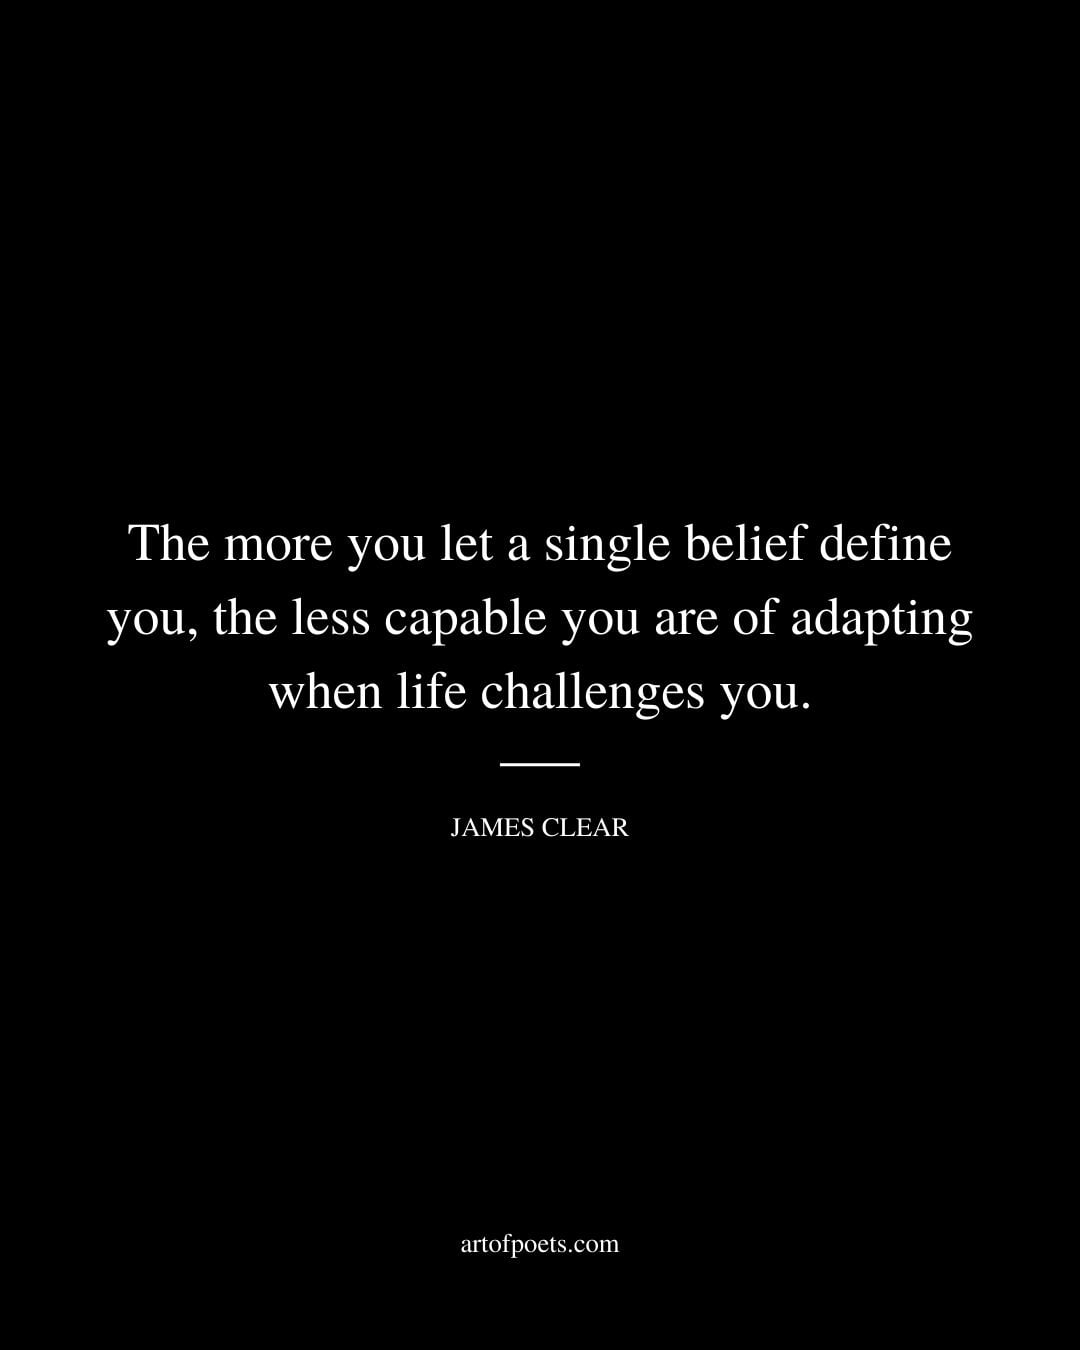 The more you let a single belief define you the less capable you are of adapting when life challenges you